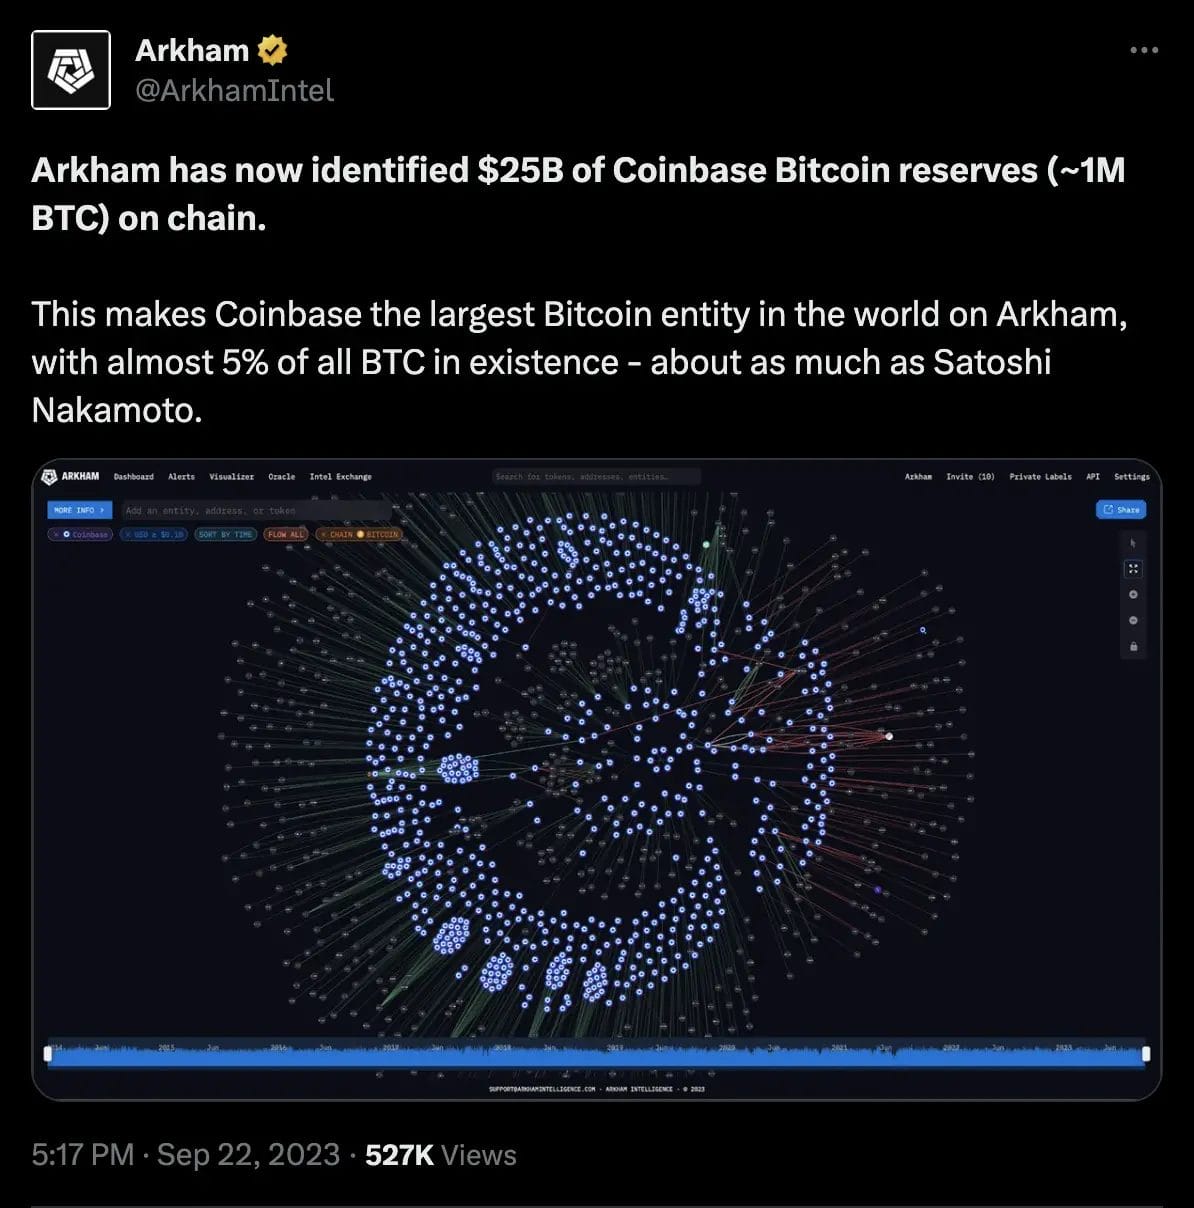 Arkham has now identified $25B of Coinbase Bitcoin reserves (~1M BTC) on chain. Twitter